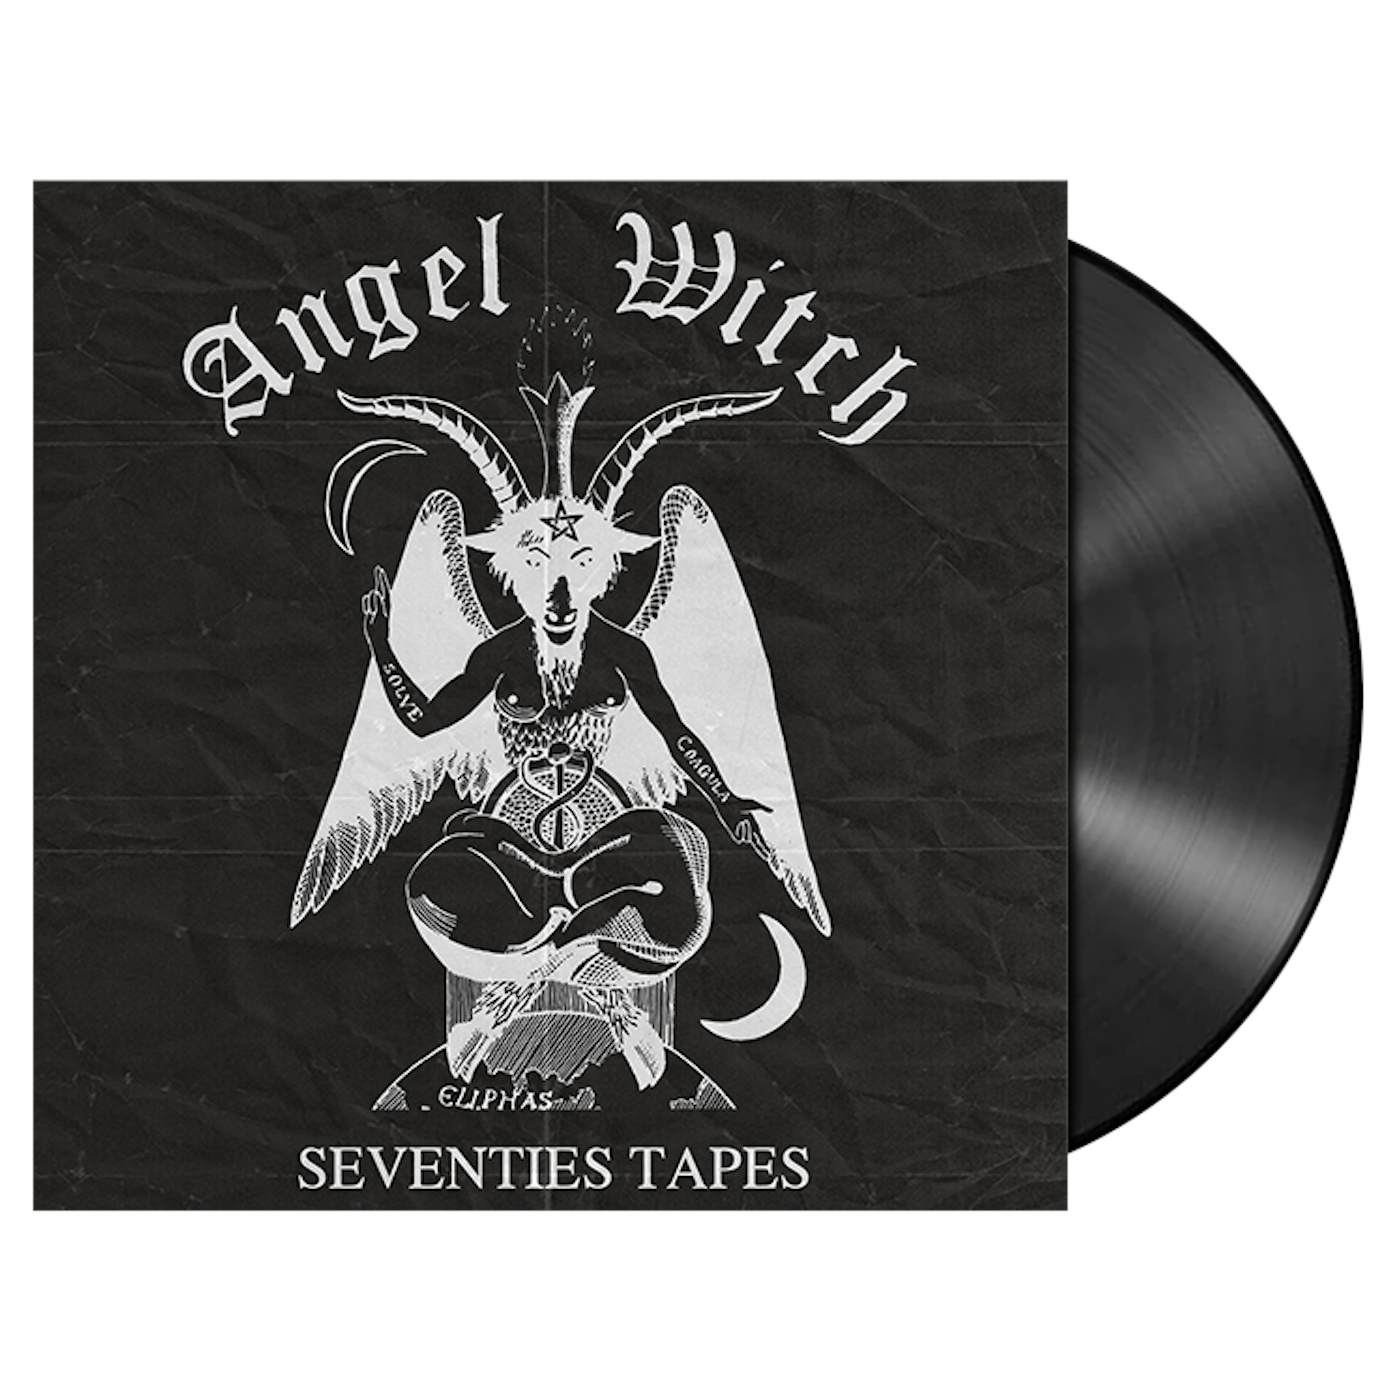 ANGEL WITCH - 'Seventies Tapes' LP (Vinyl)